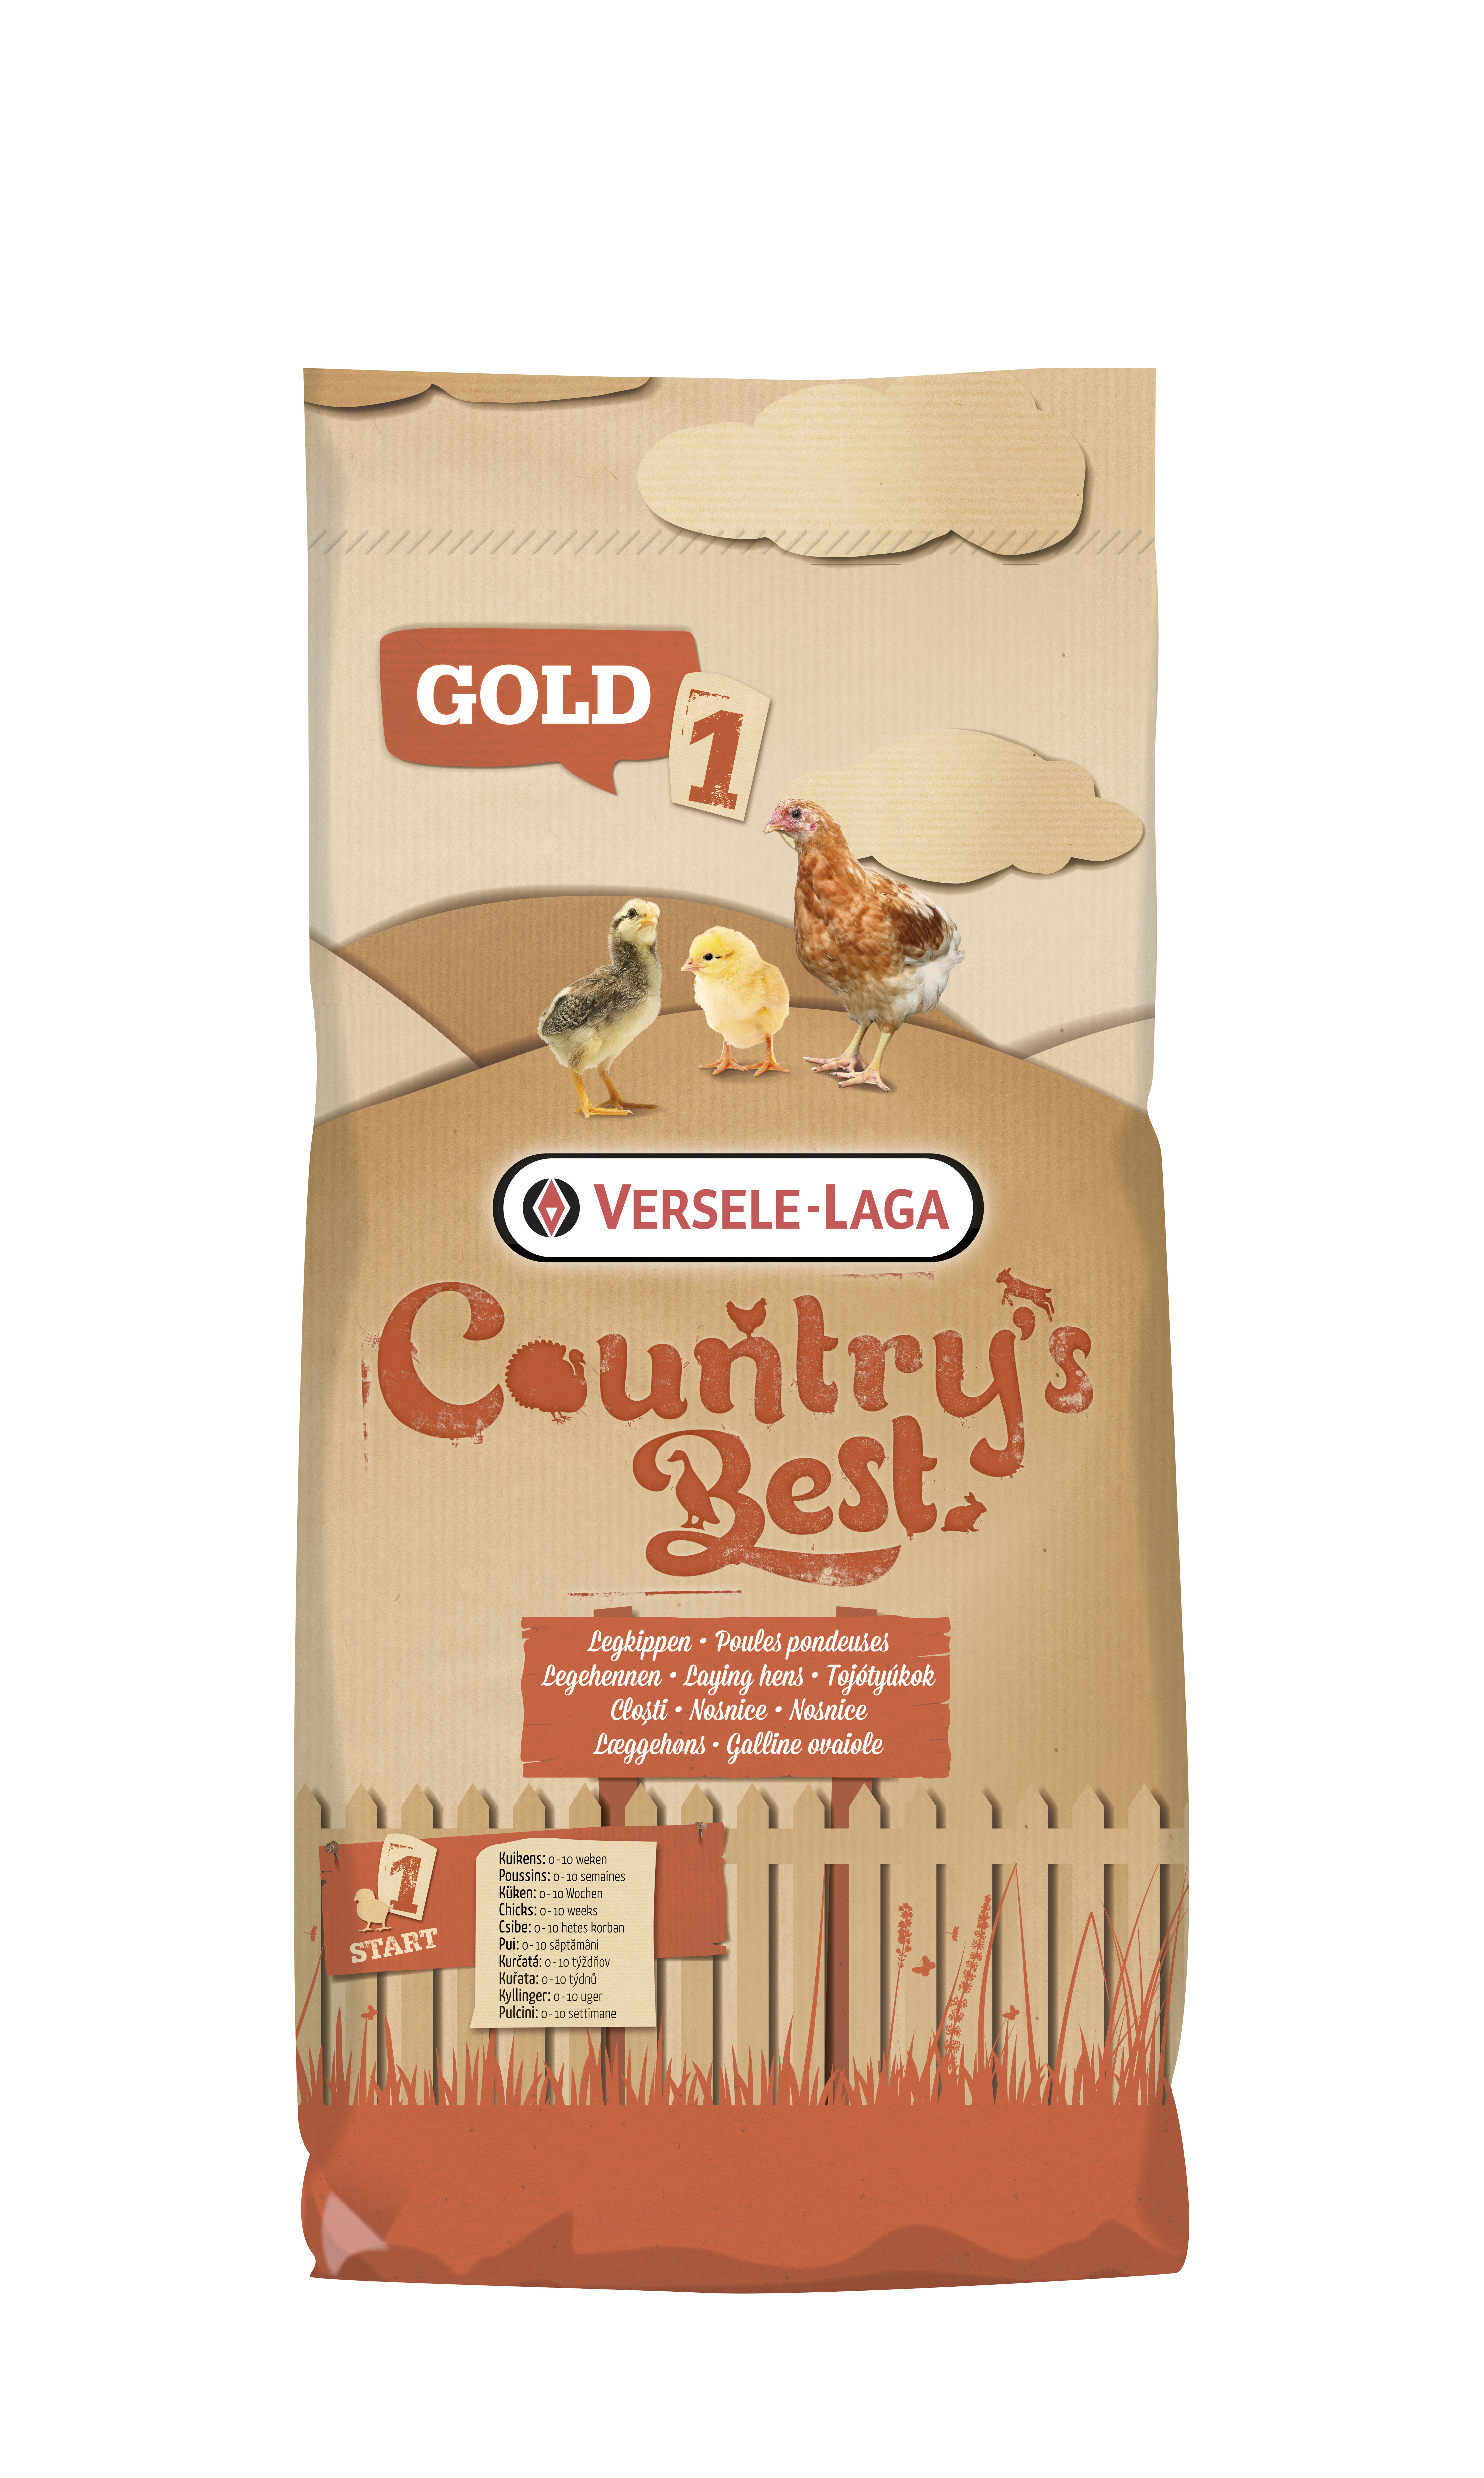 Versele Laga Country's Best Gold 1 Poultry Crumble 20kg